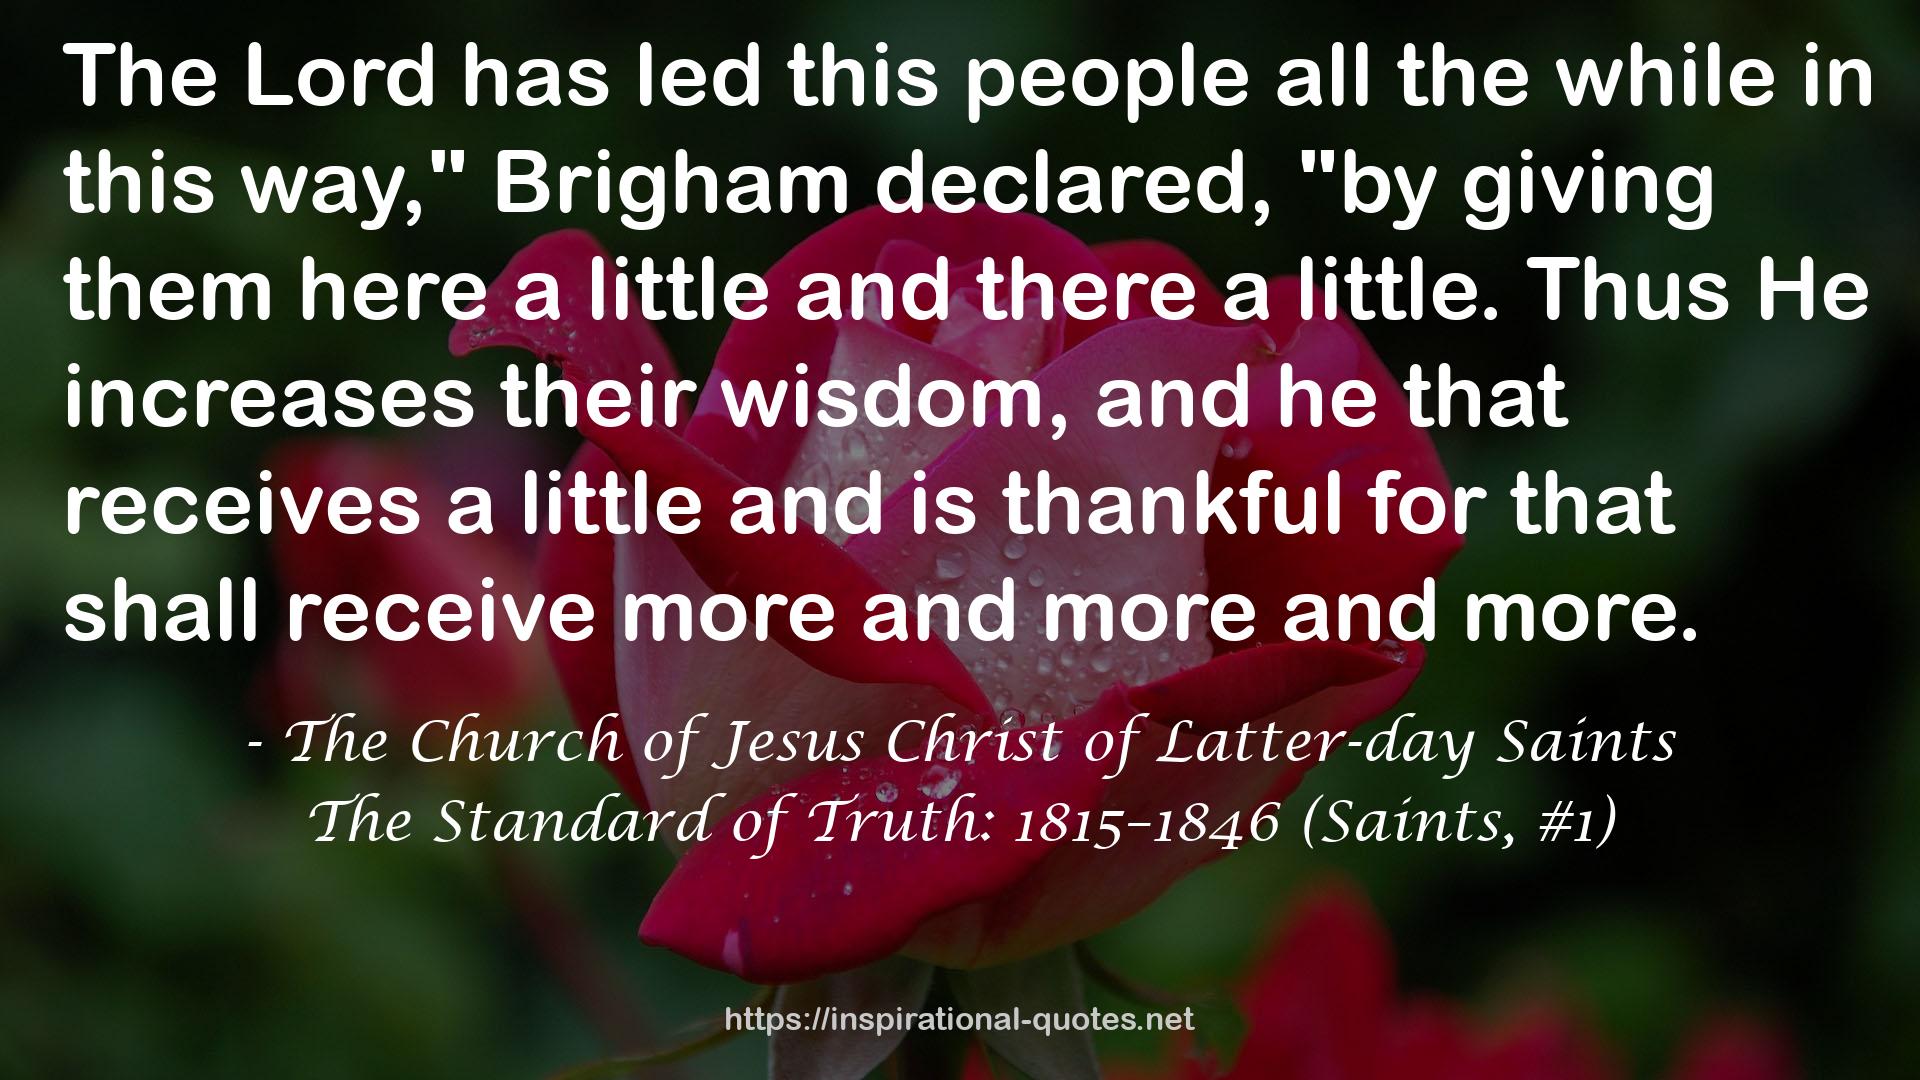 The Standard of Truth: 1815–1846 (Saints, #1) QUOTES